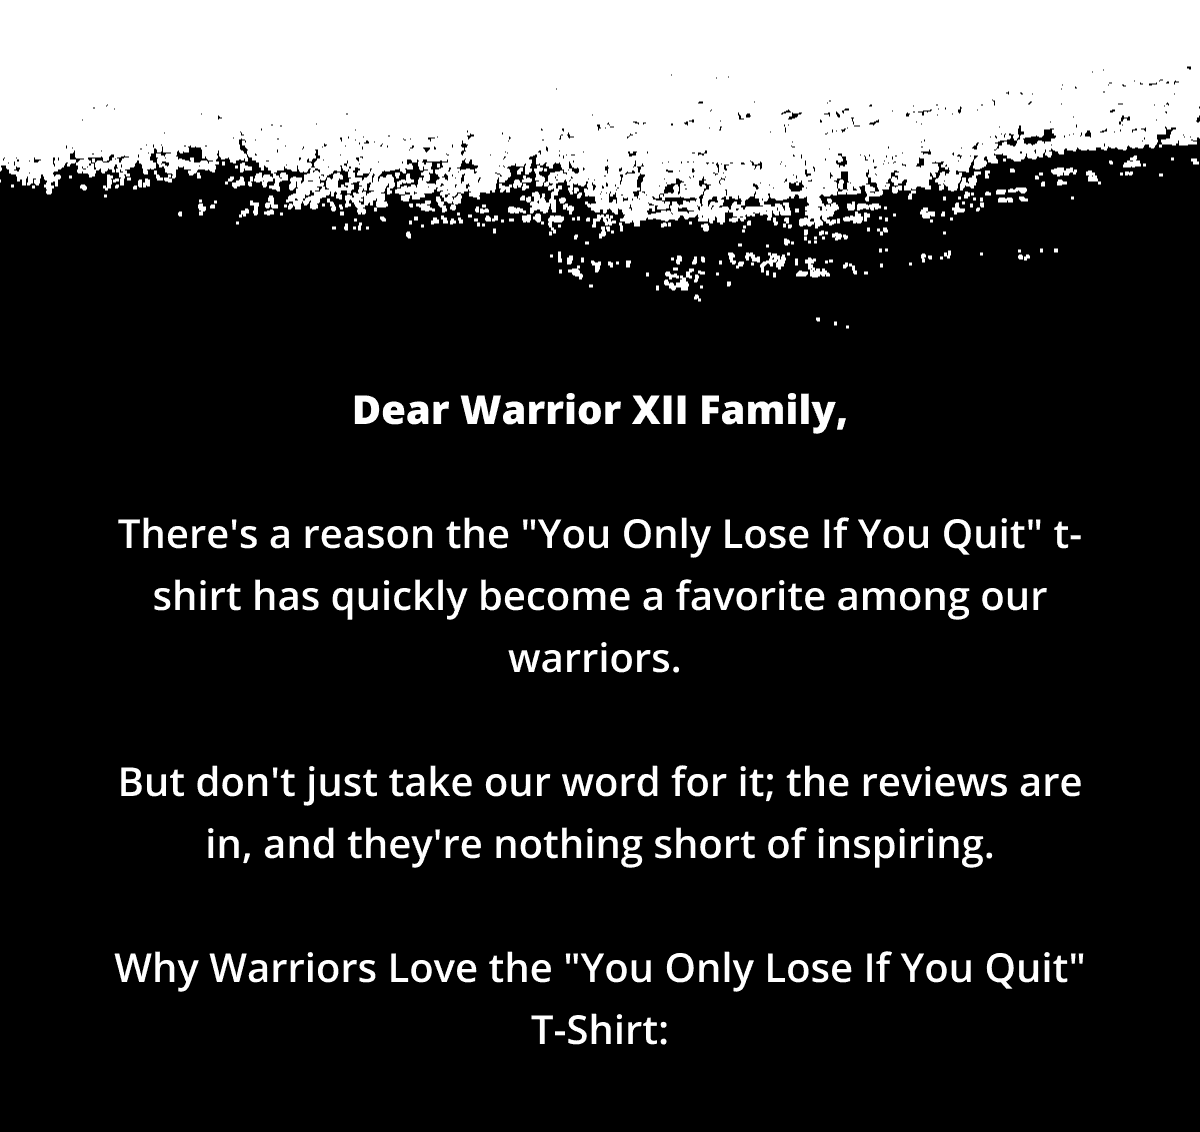 Dear Warrior XII Family, There's a reason the "You Only Lose If You Quit" t-shirt has quickly become a favorite among our warriors. But don't just take our word for it; the reviews are in, and they're nothing short of inspiring. Why Warriors Love the "You Only Lose If You Quit" Tee: